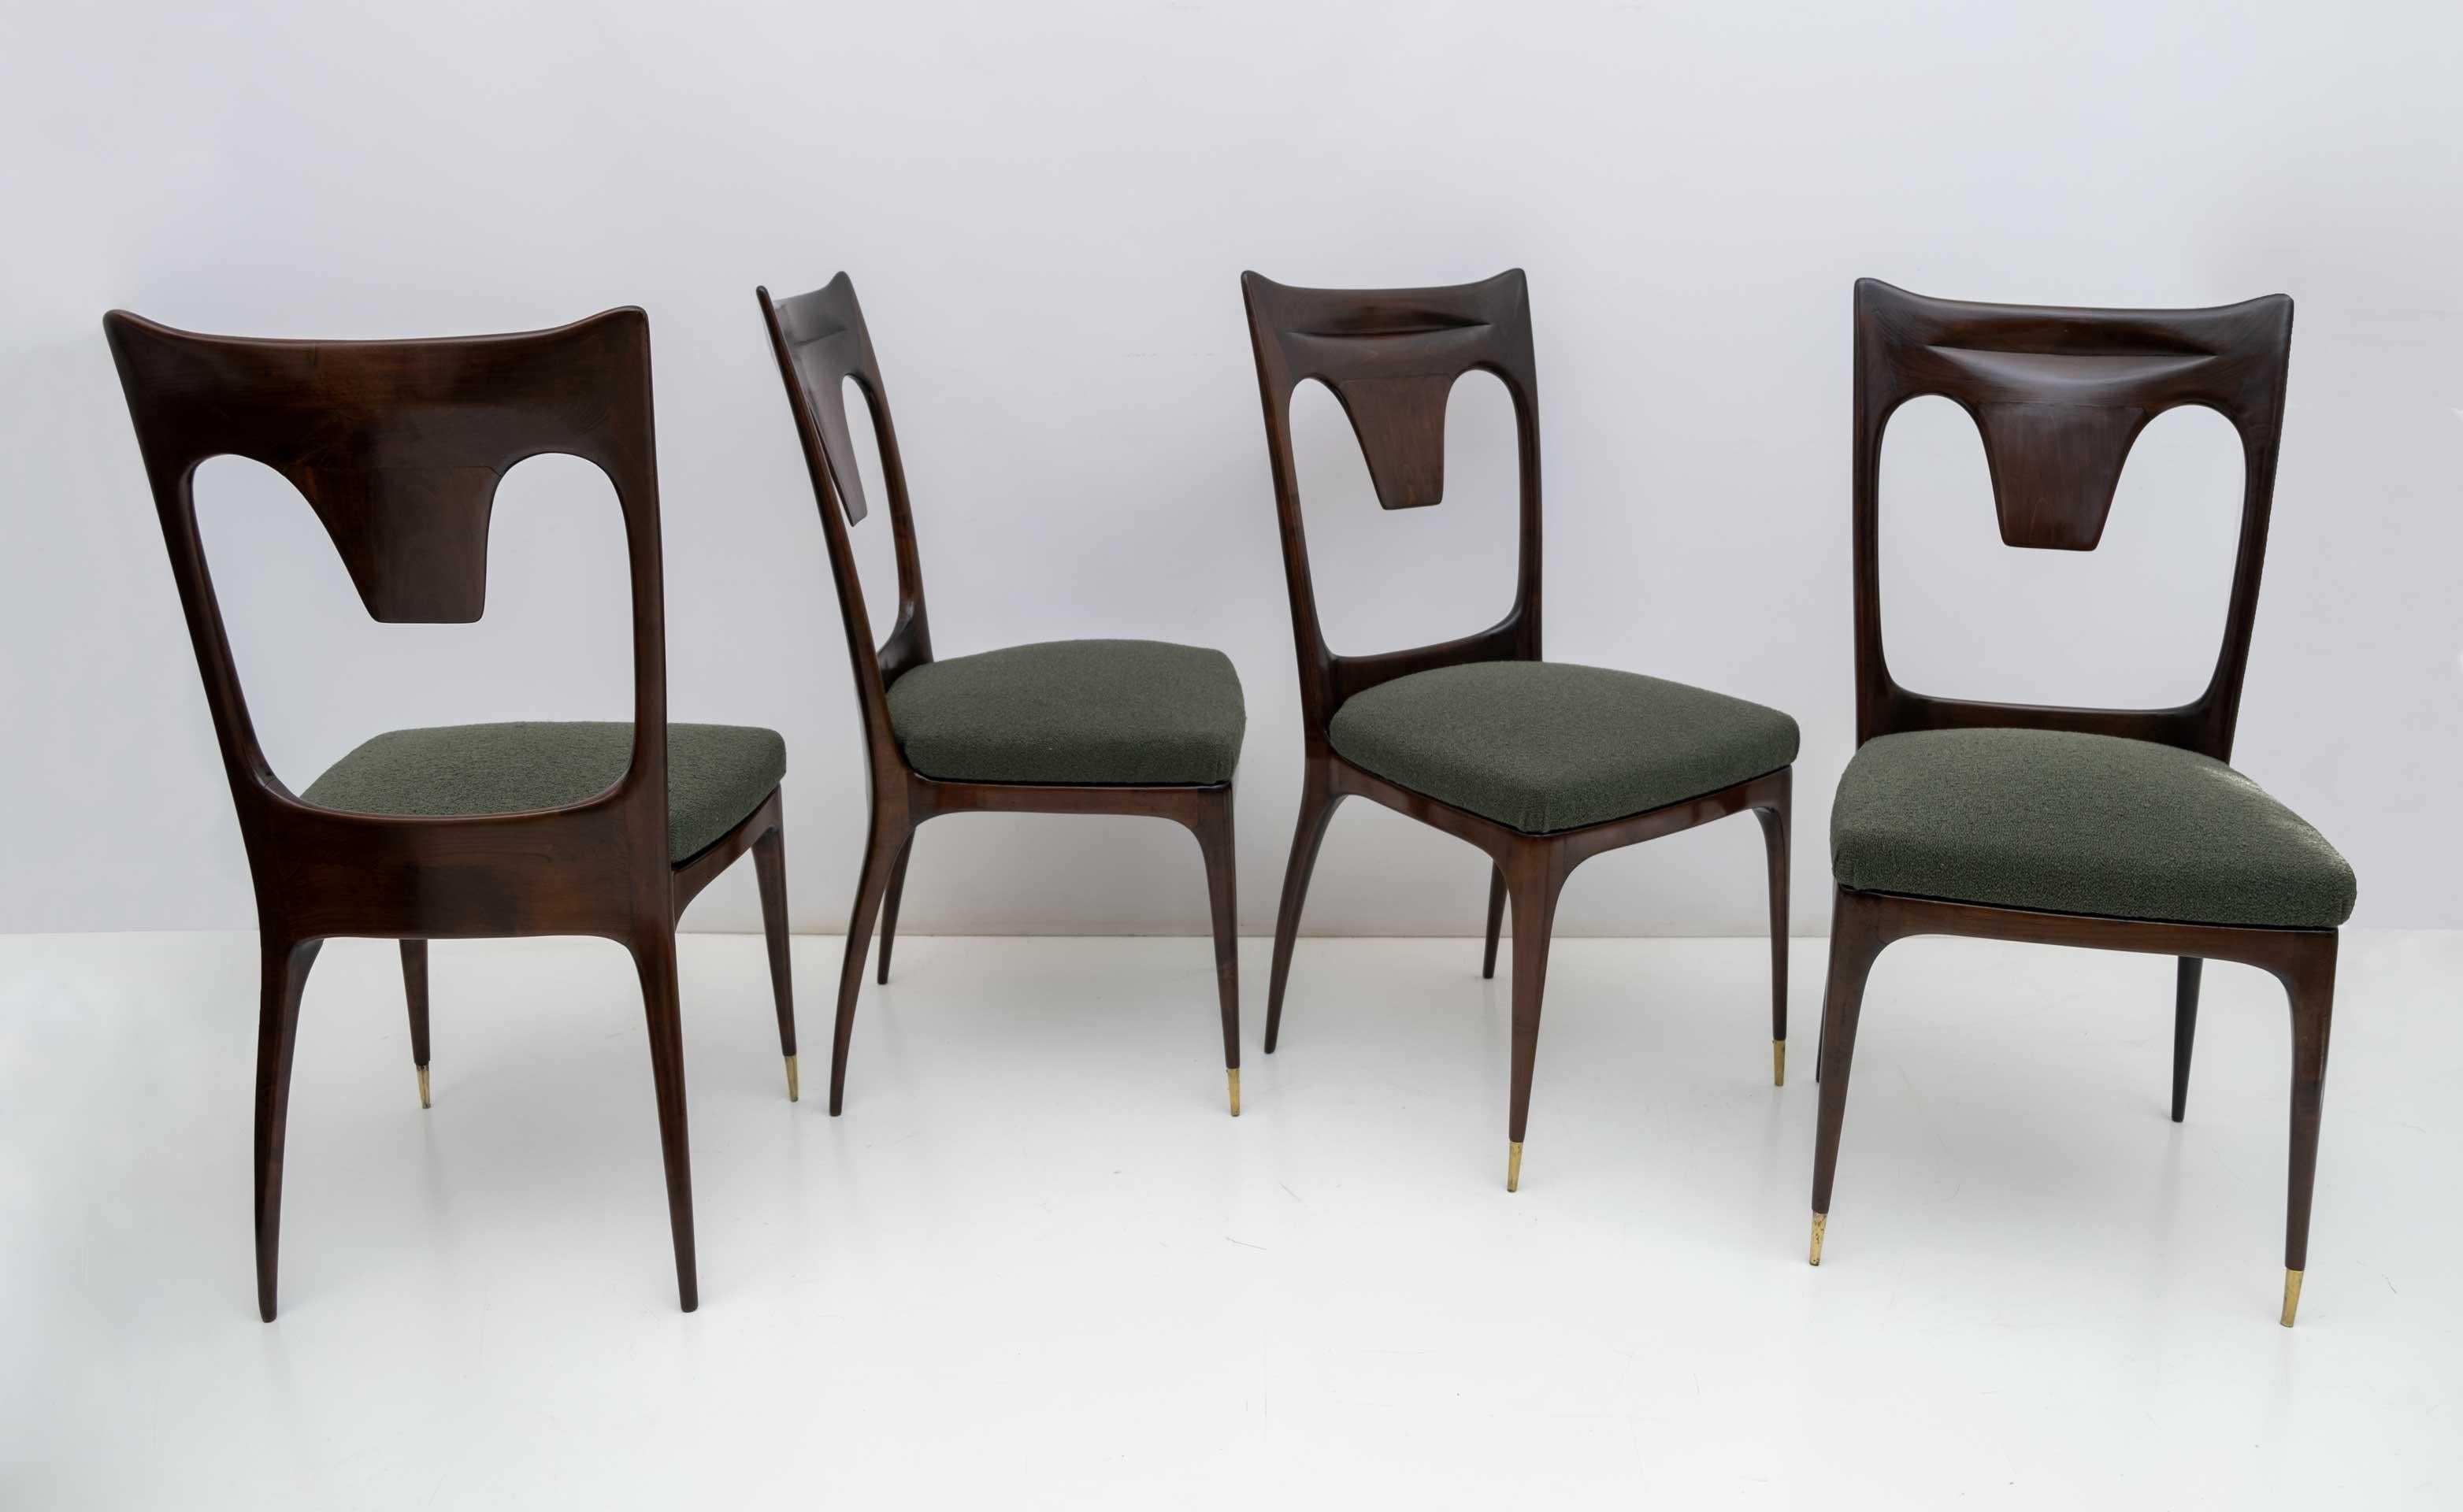 Ico & Luisa Parisi for Ariberto Colombo, Cantù, set of four rare walnut dining chairs. Sculptural structure with slightly curved butterfly backrest, frame seat with original springs and tapered legs with brass tips. Completely restored and recently